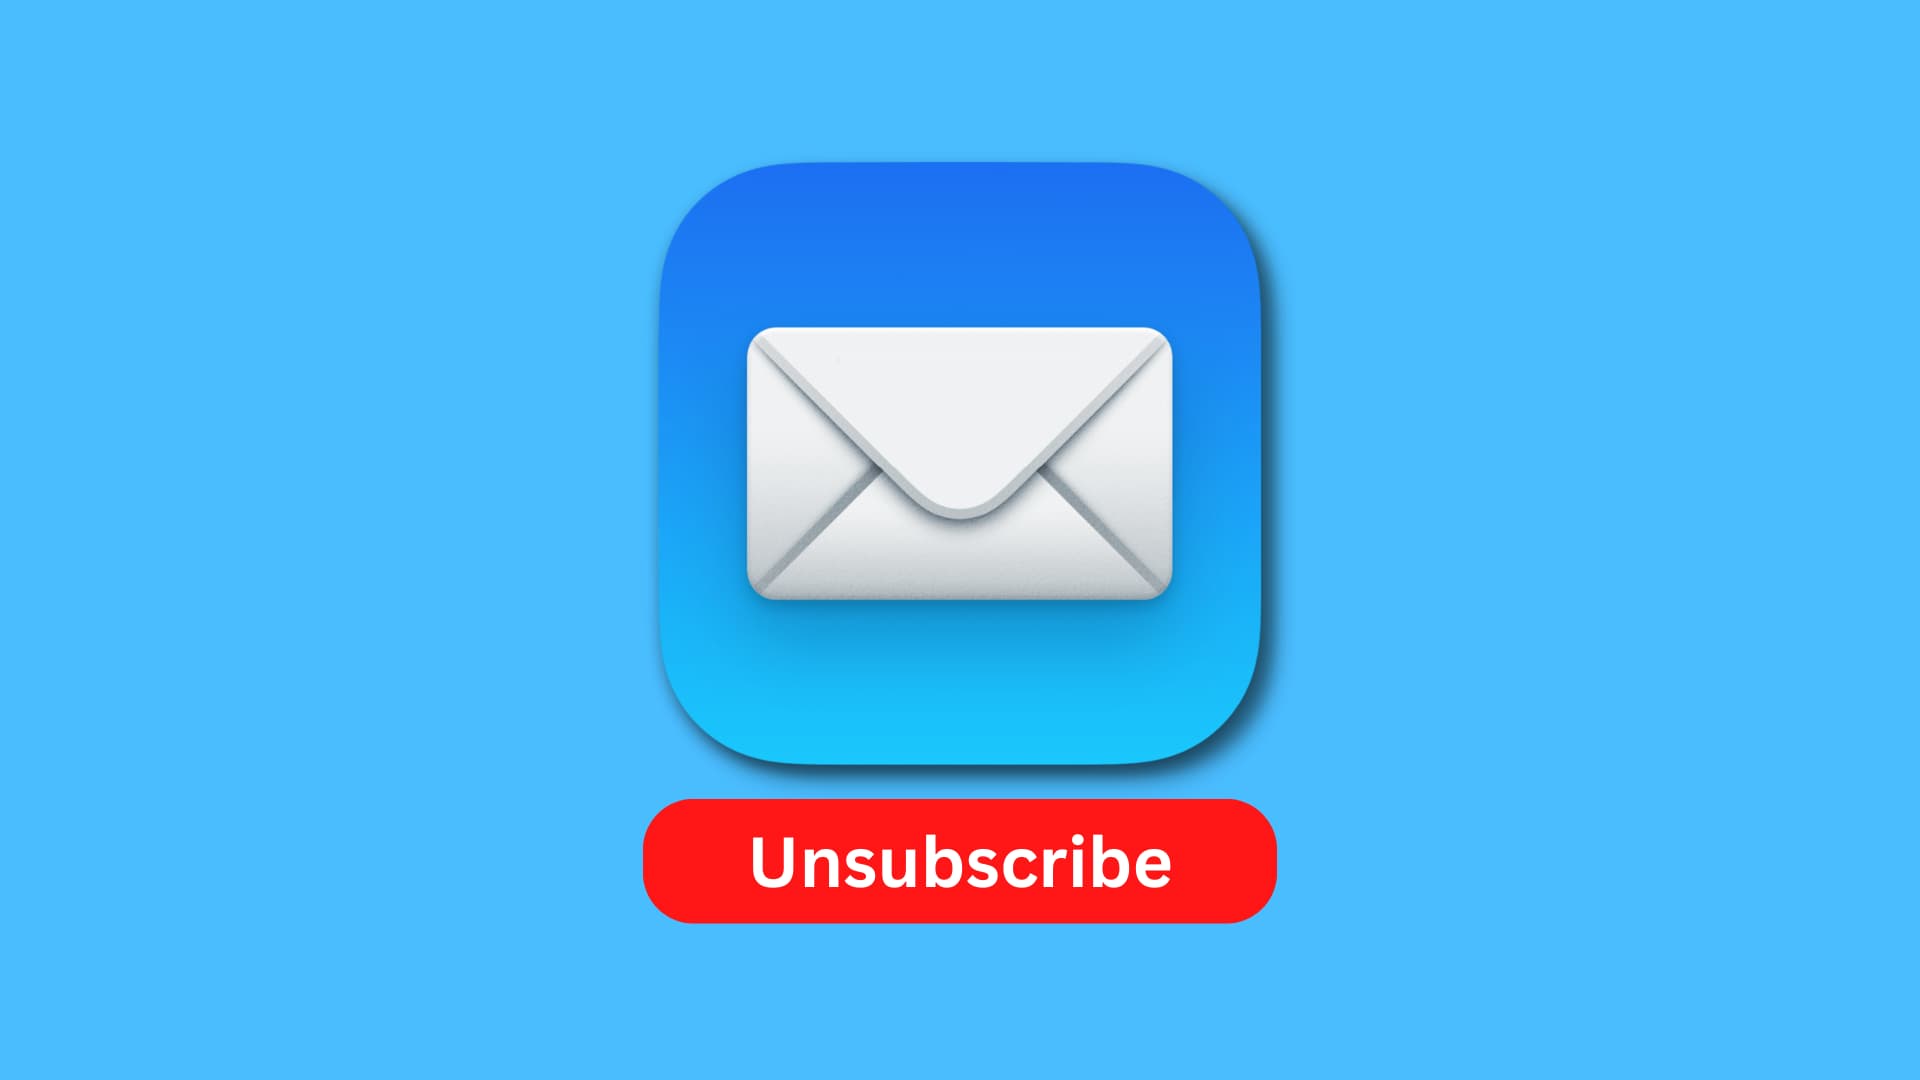 Apple Mail app icon with Unsubscribe button below it